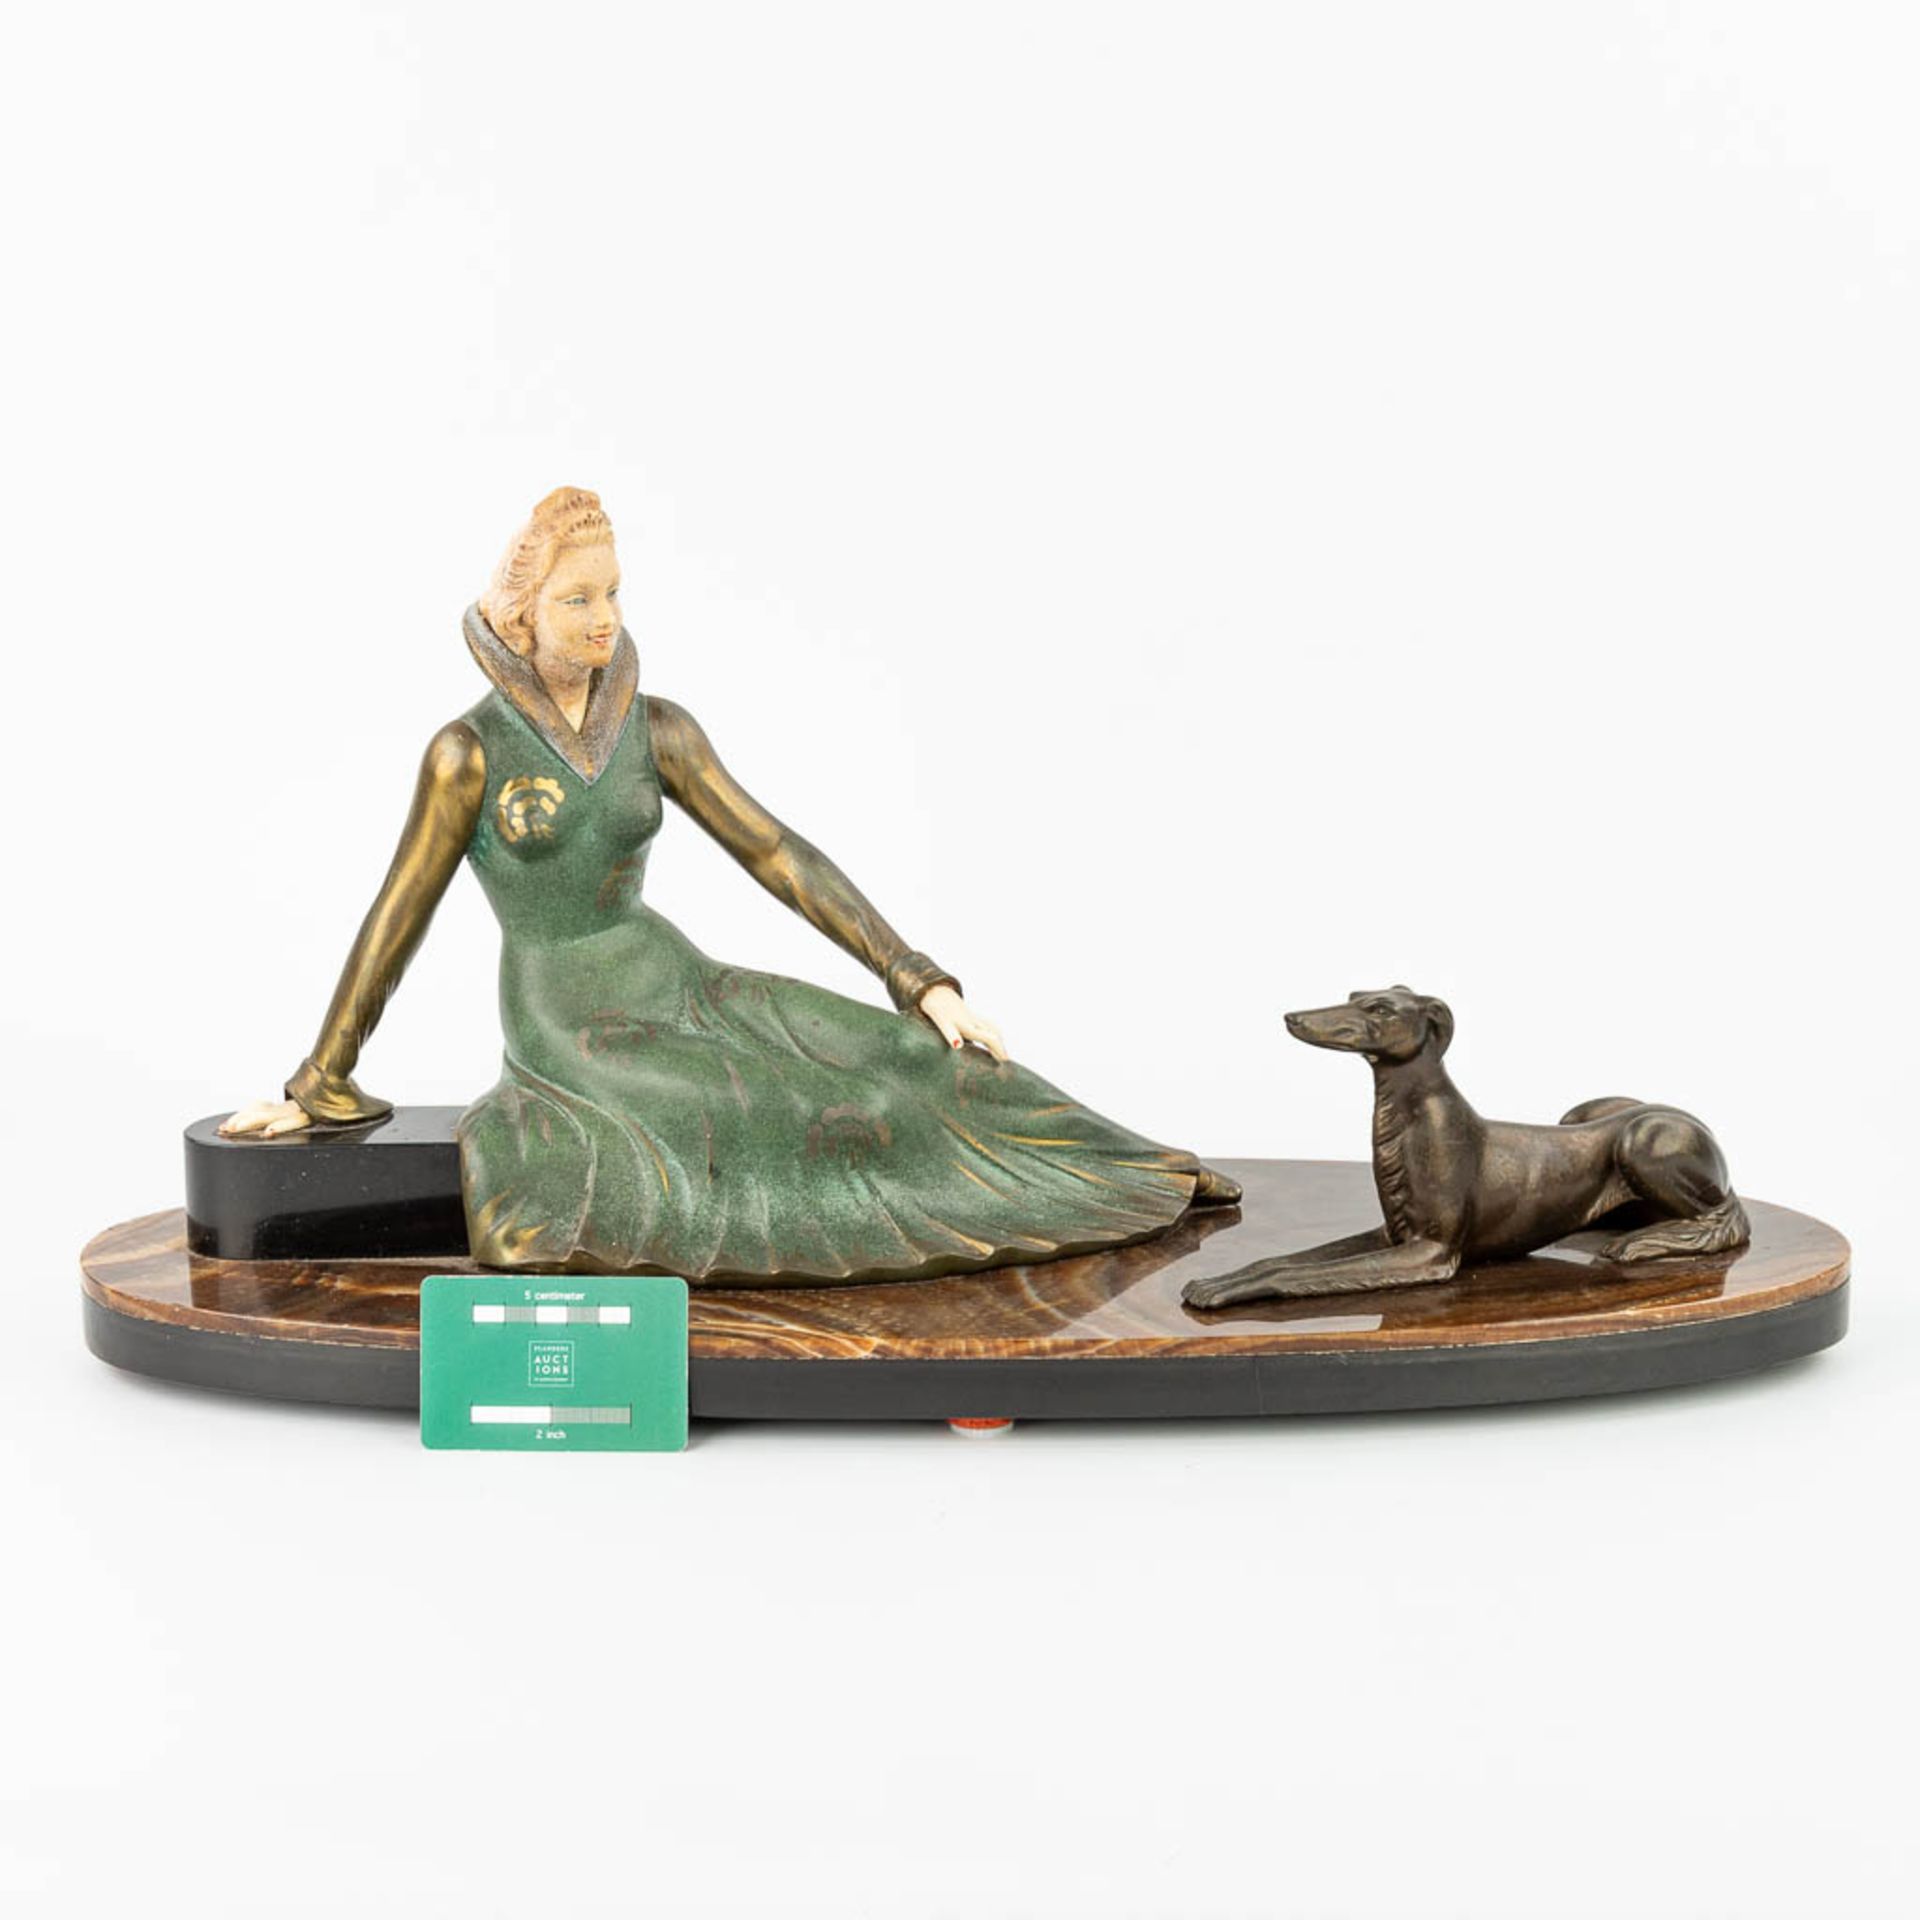 Salvatore MELANI (1902-1934) 'Lady with greyhound' an art deco statue made of spelter. (H:31cm) - Image 3 of 12